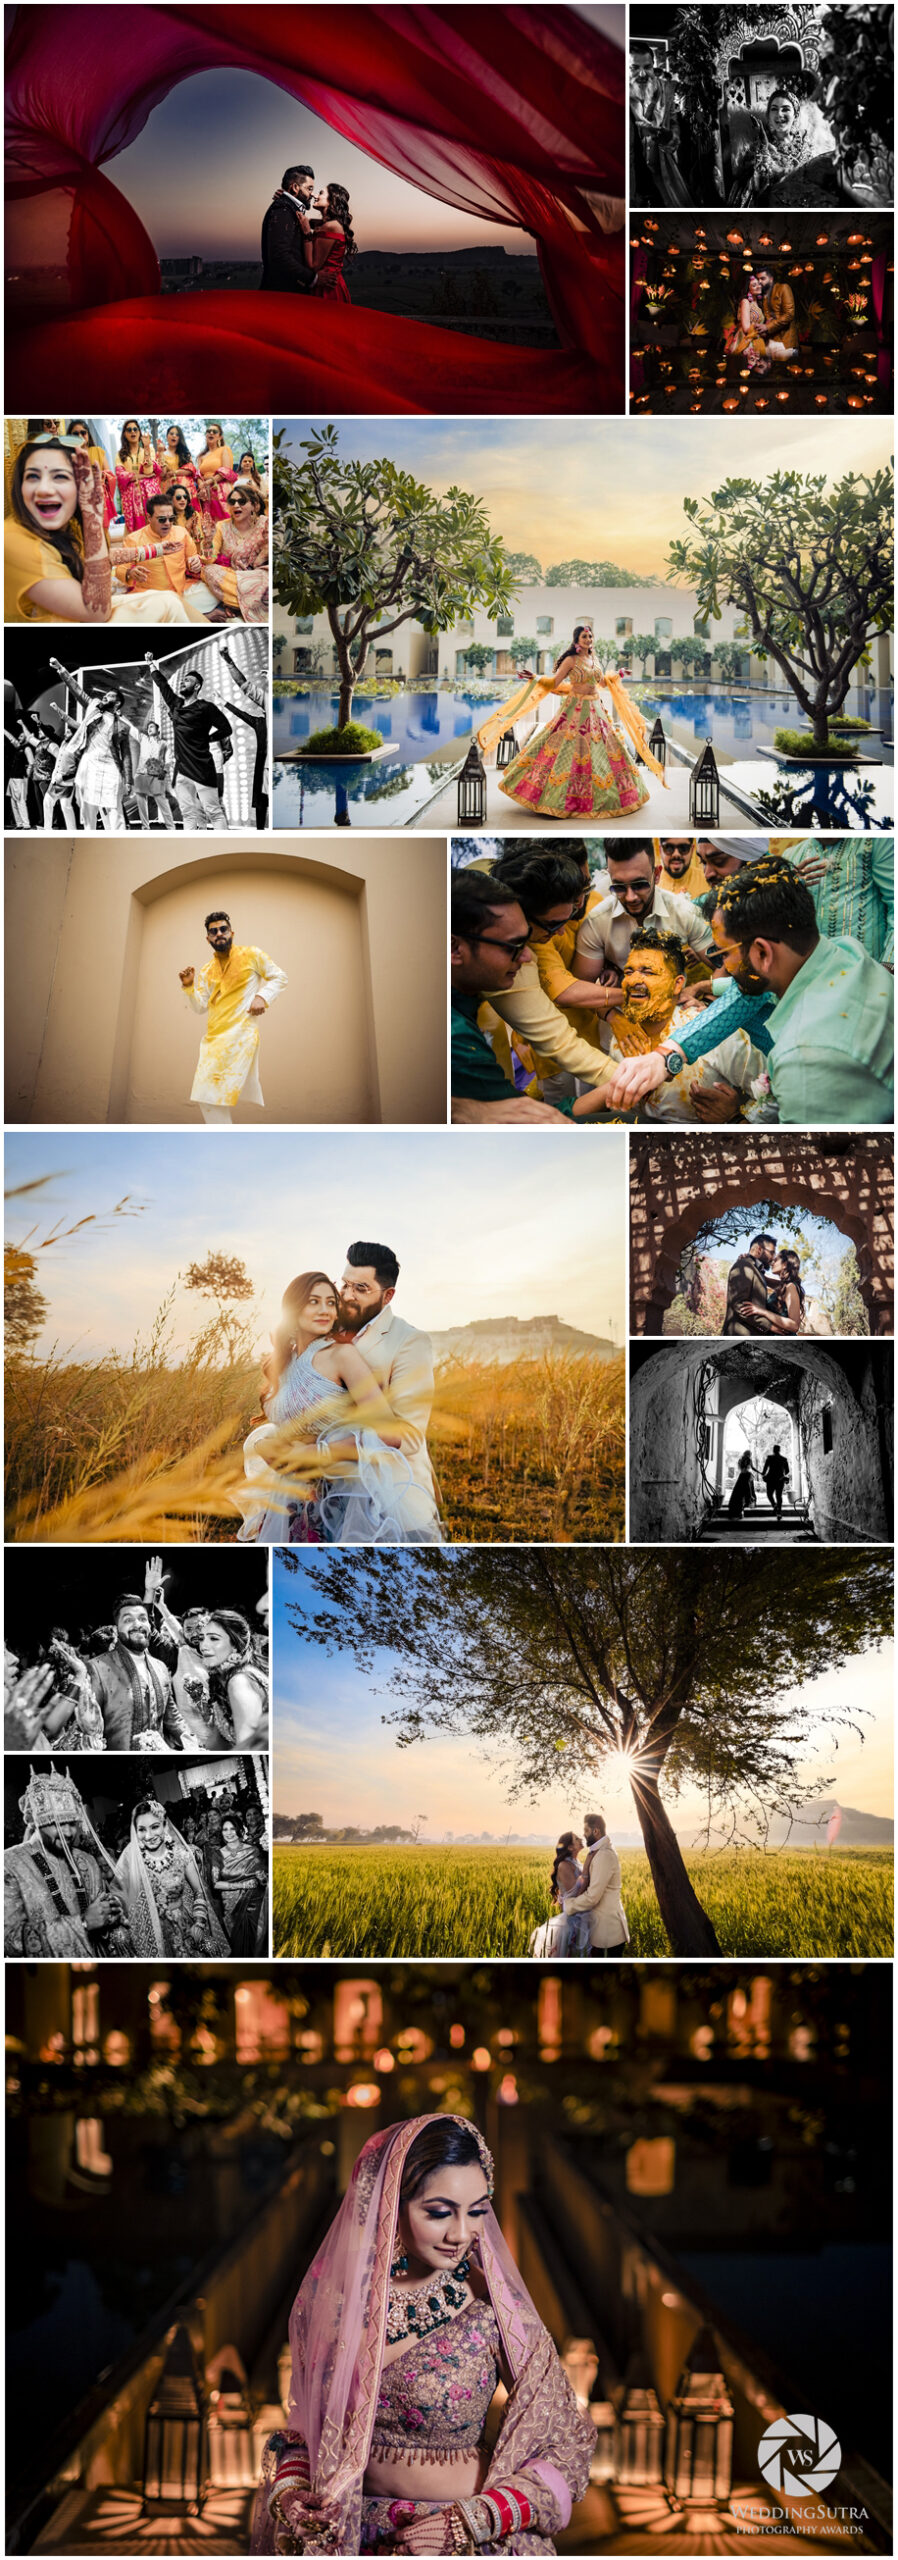 Photography Awards 2021 - Wedding Photographer From the Year